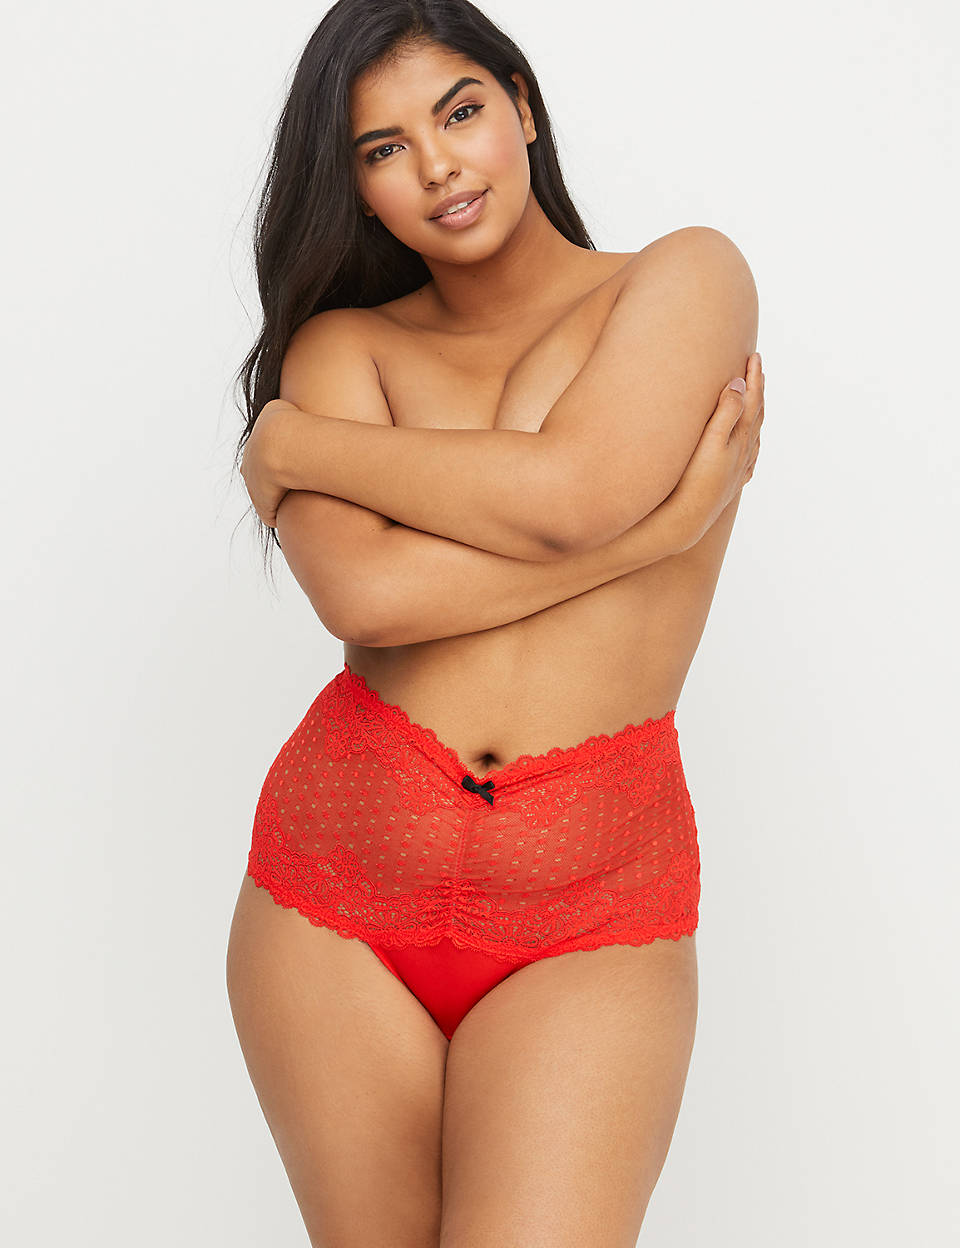 Plus Size Panties for Valentine's Day- Wide-Side Thong Panty With Split Gusset